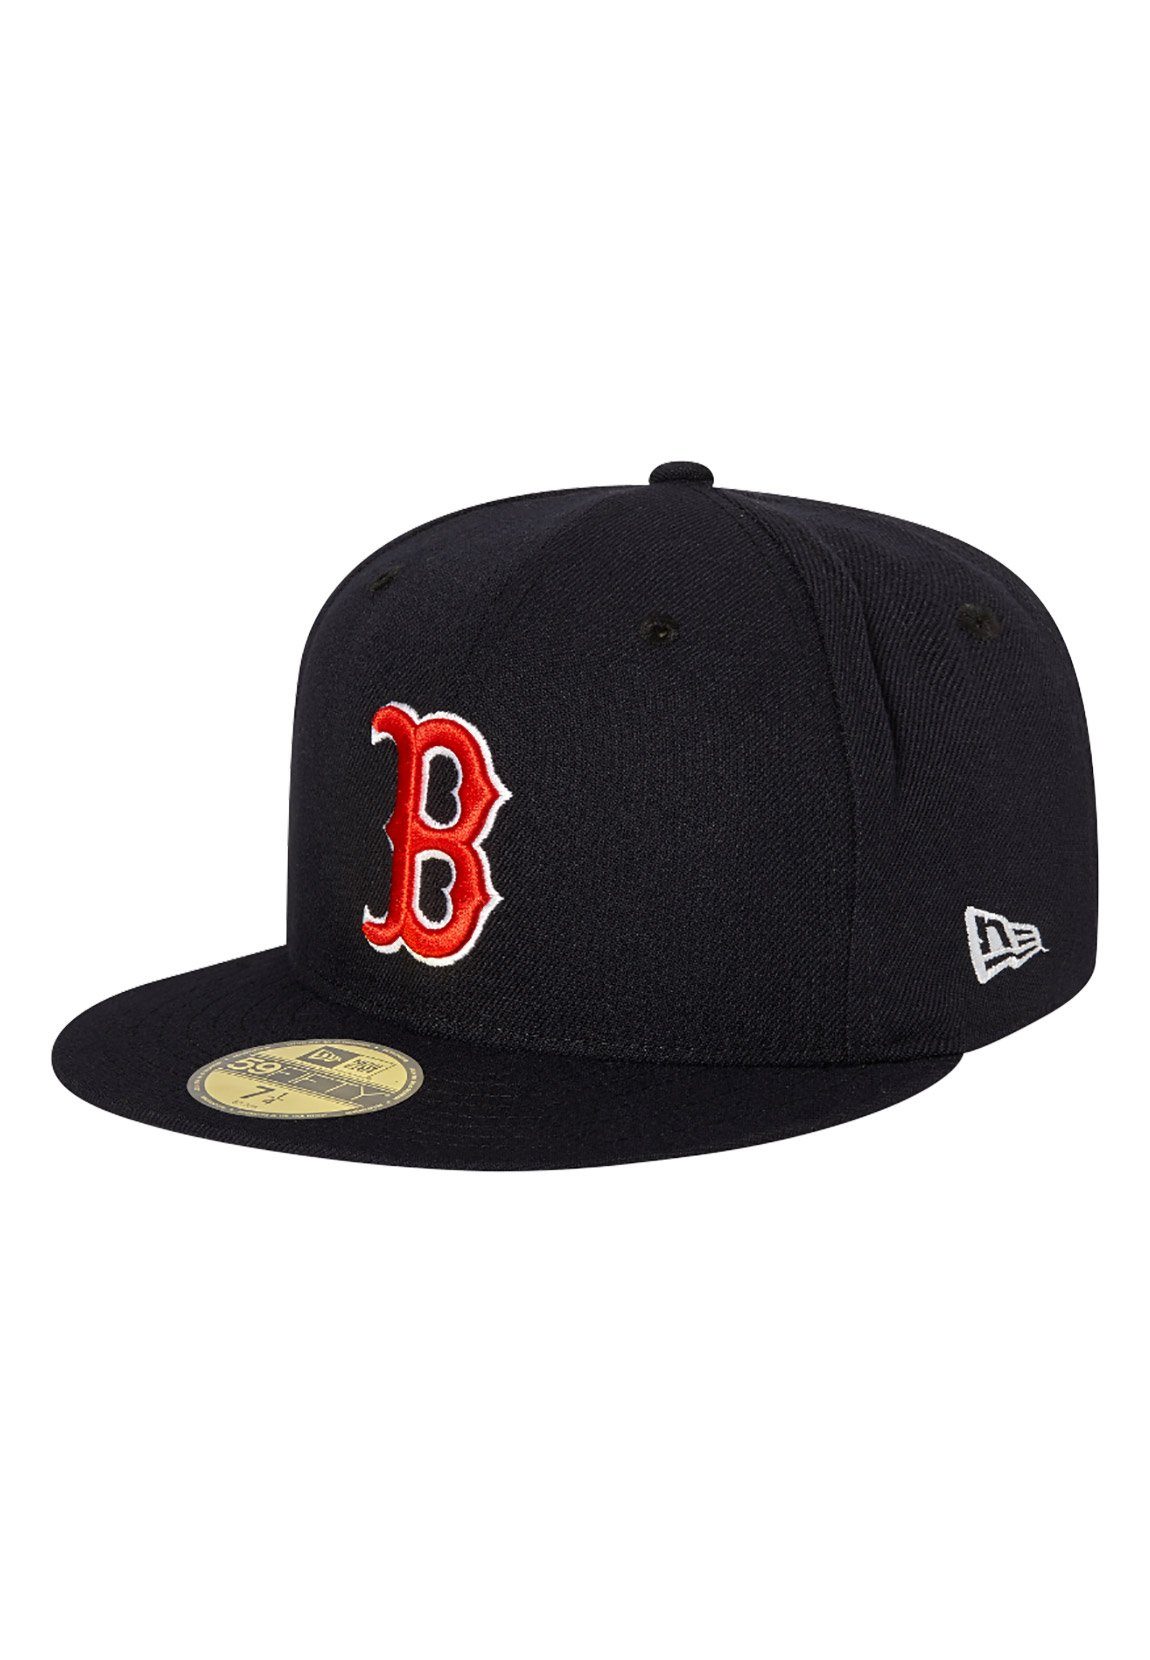 Fitted Era BOSTON New Era Fitted Dunkelblau Authentics New Cap 59Fifty Rot Cap SOX RED